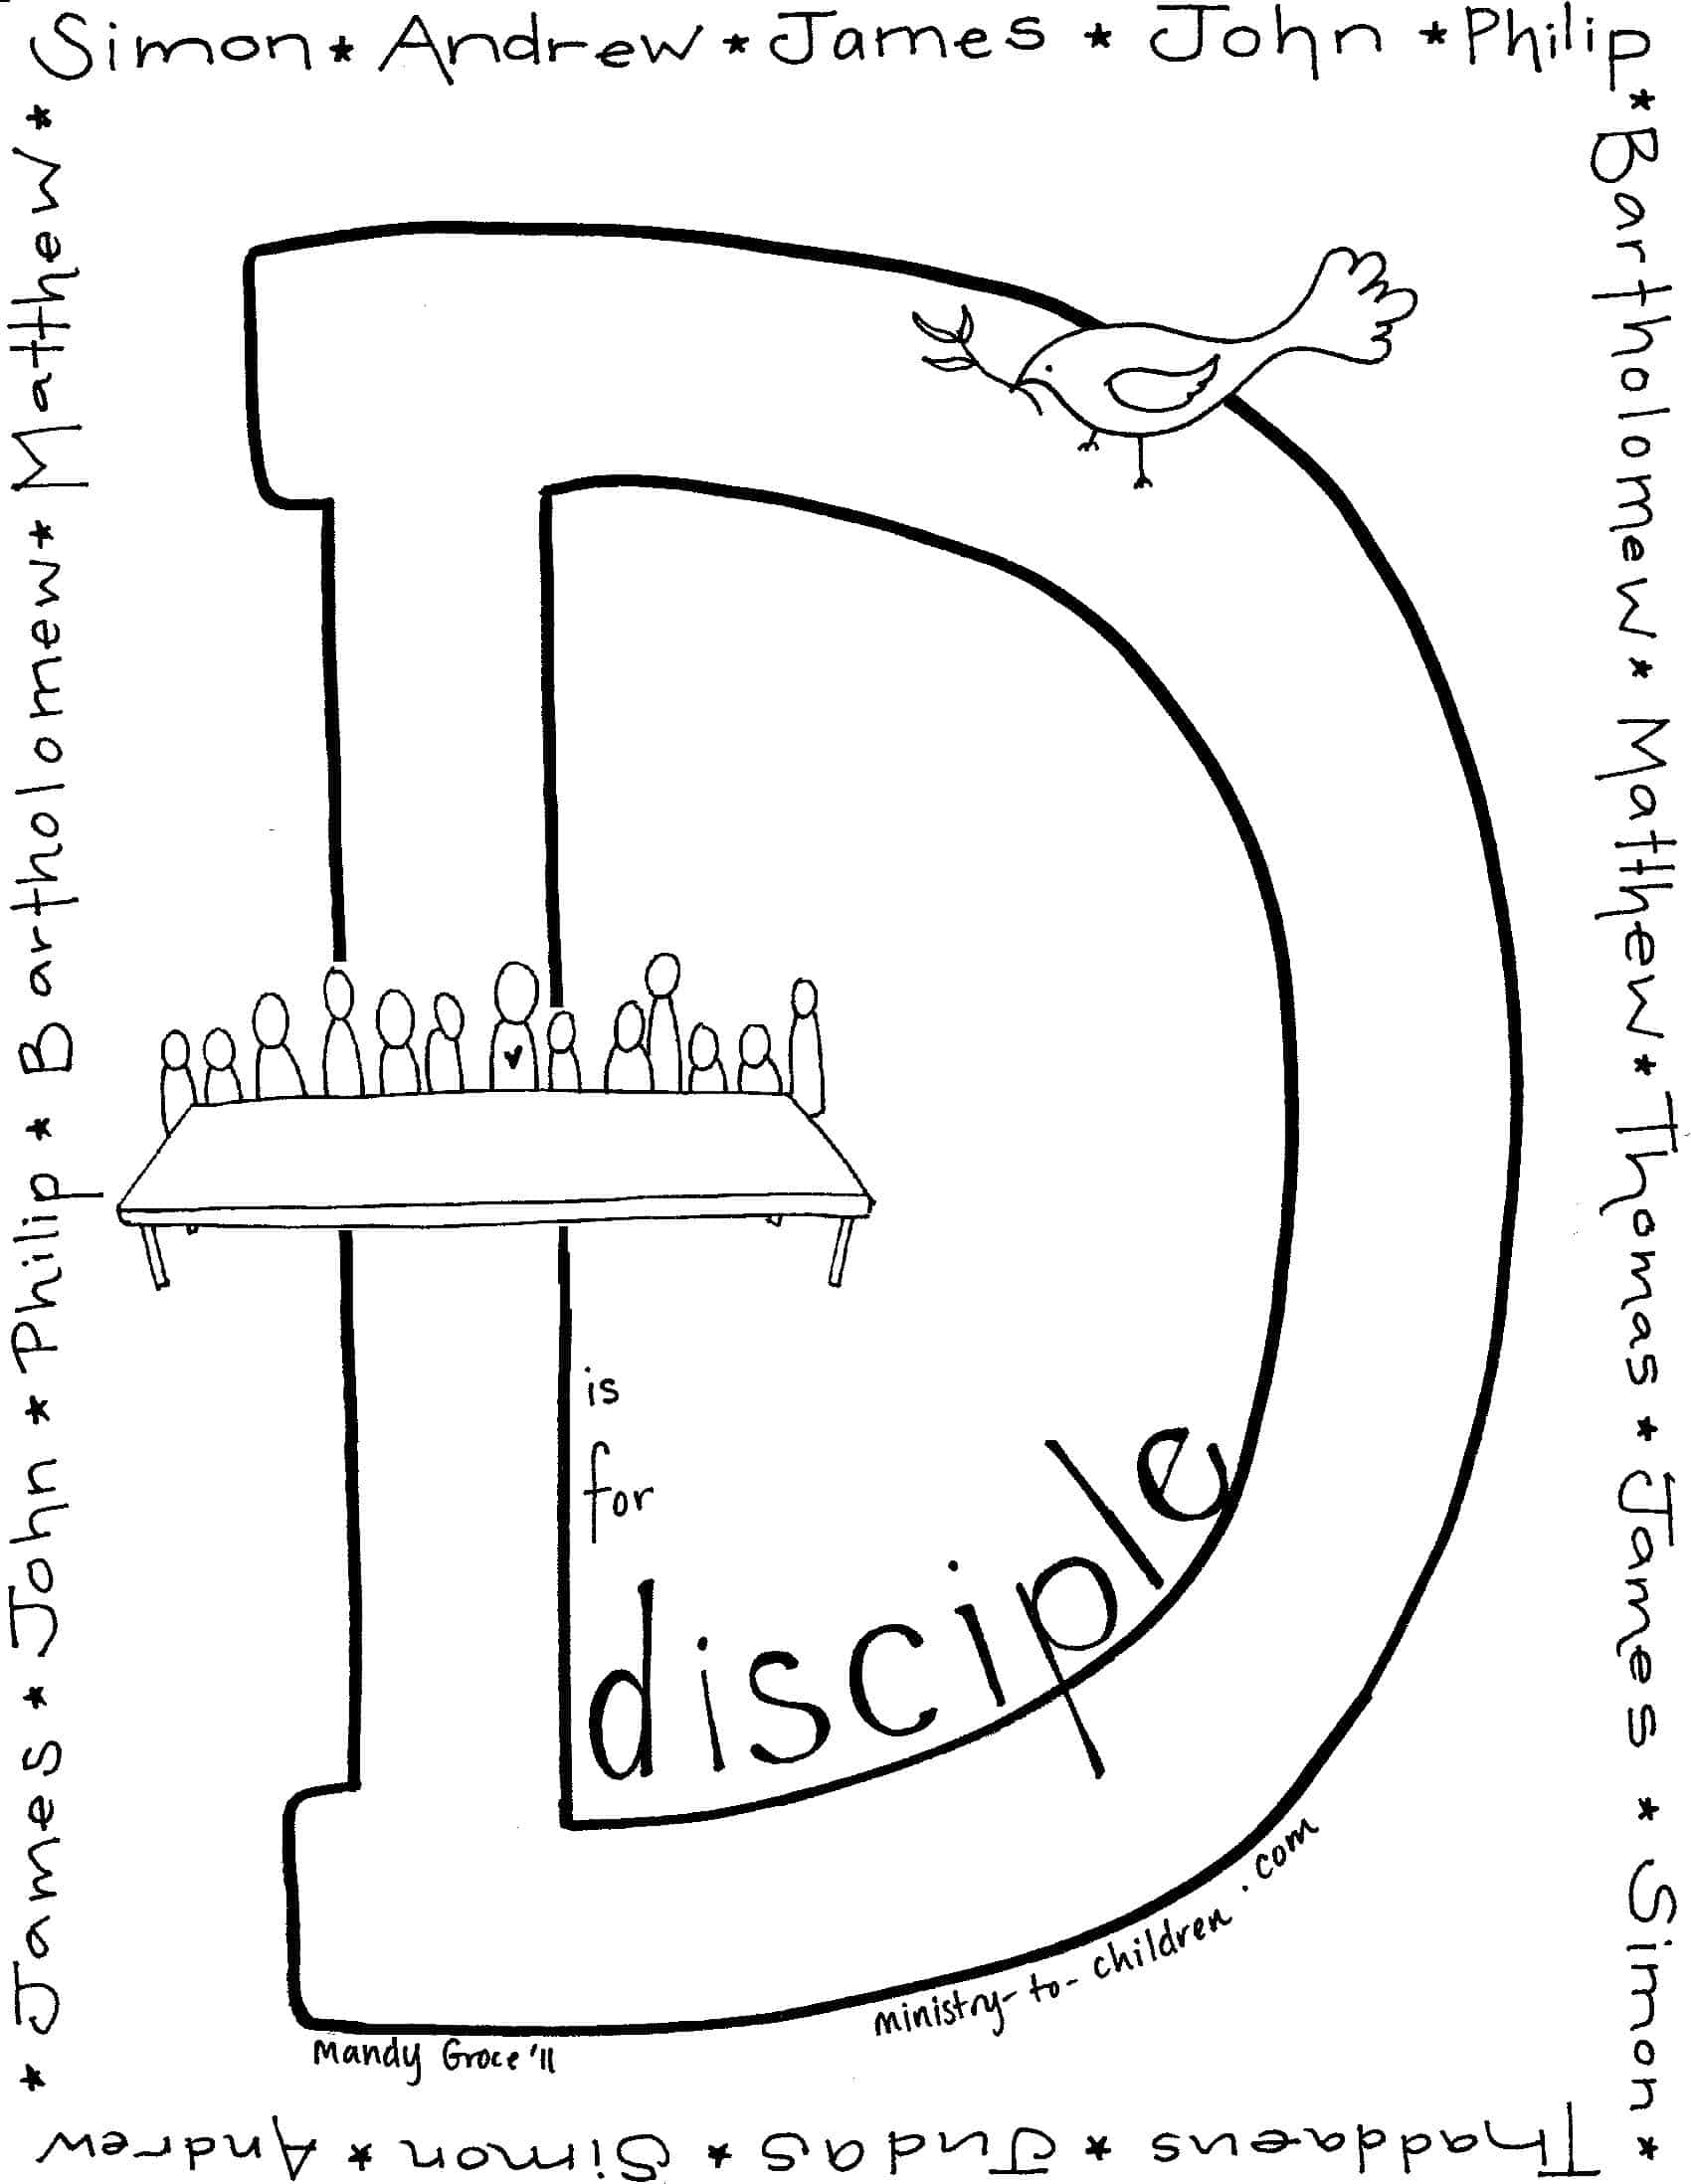 12 disciples coloring pages